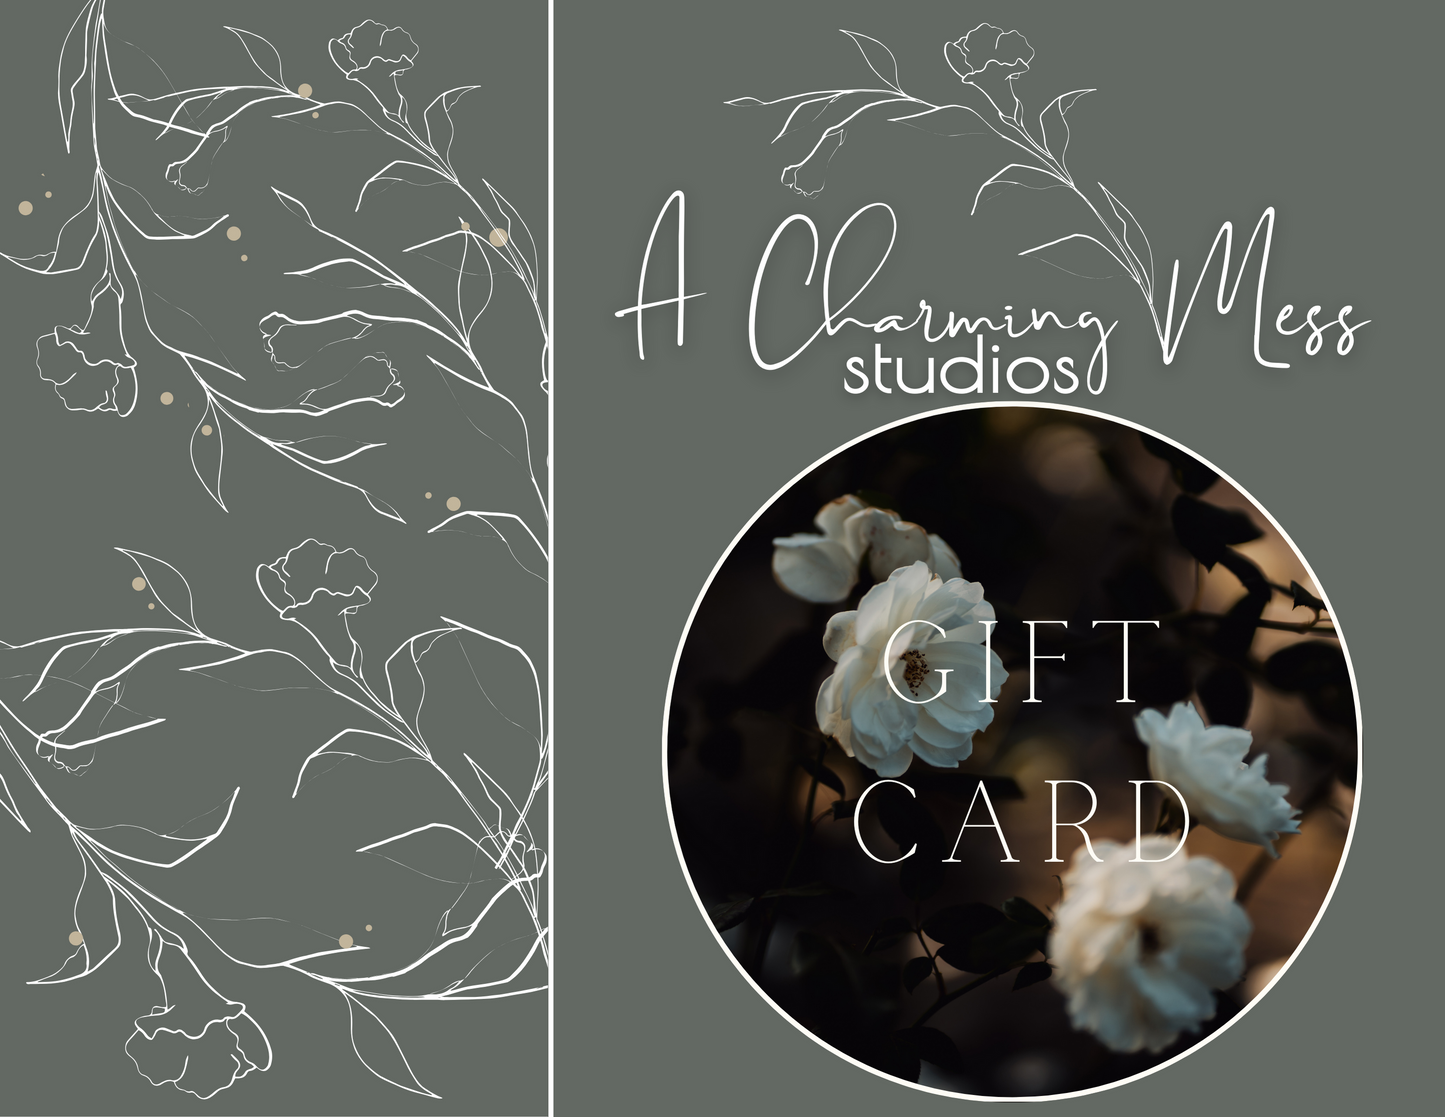 A Charming Mess Studios GIFT CARD